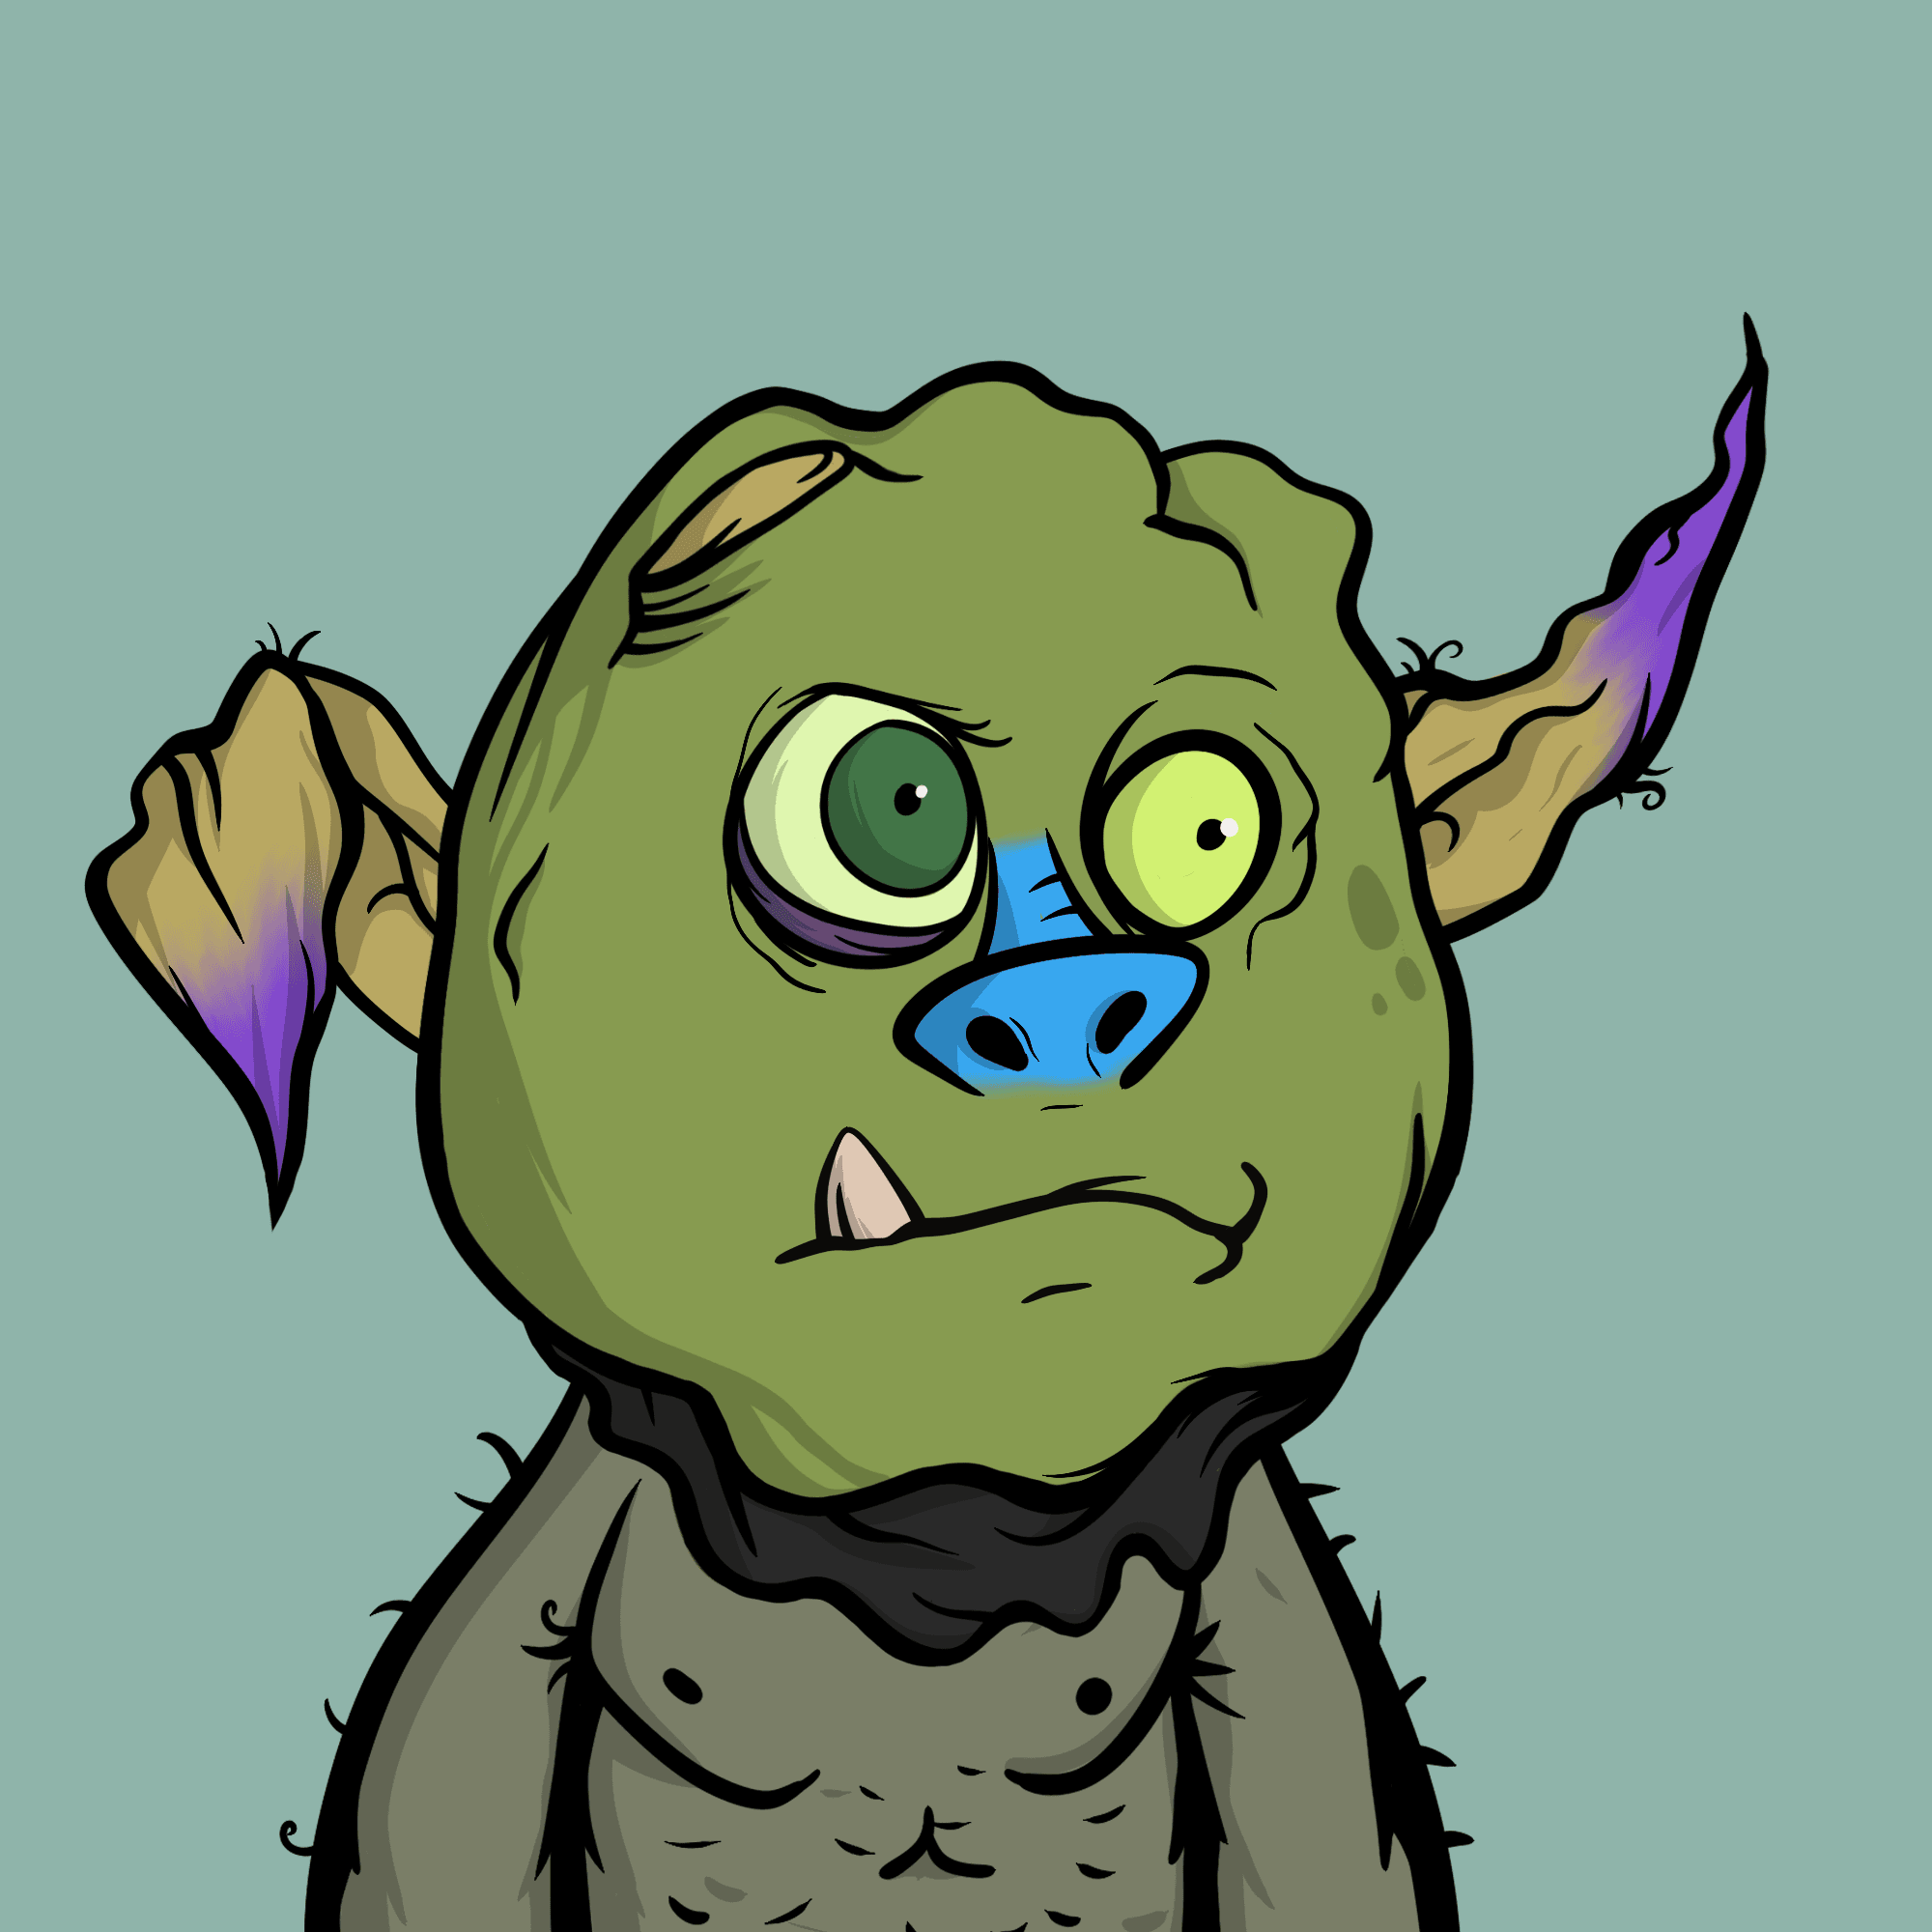 orcswtf #83